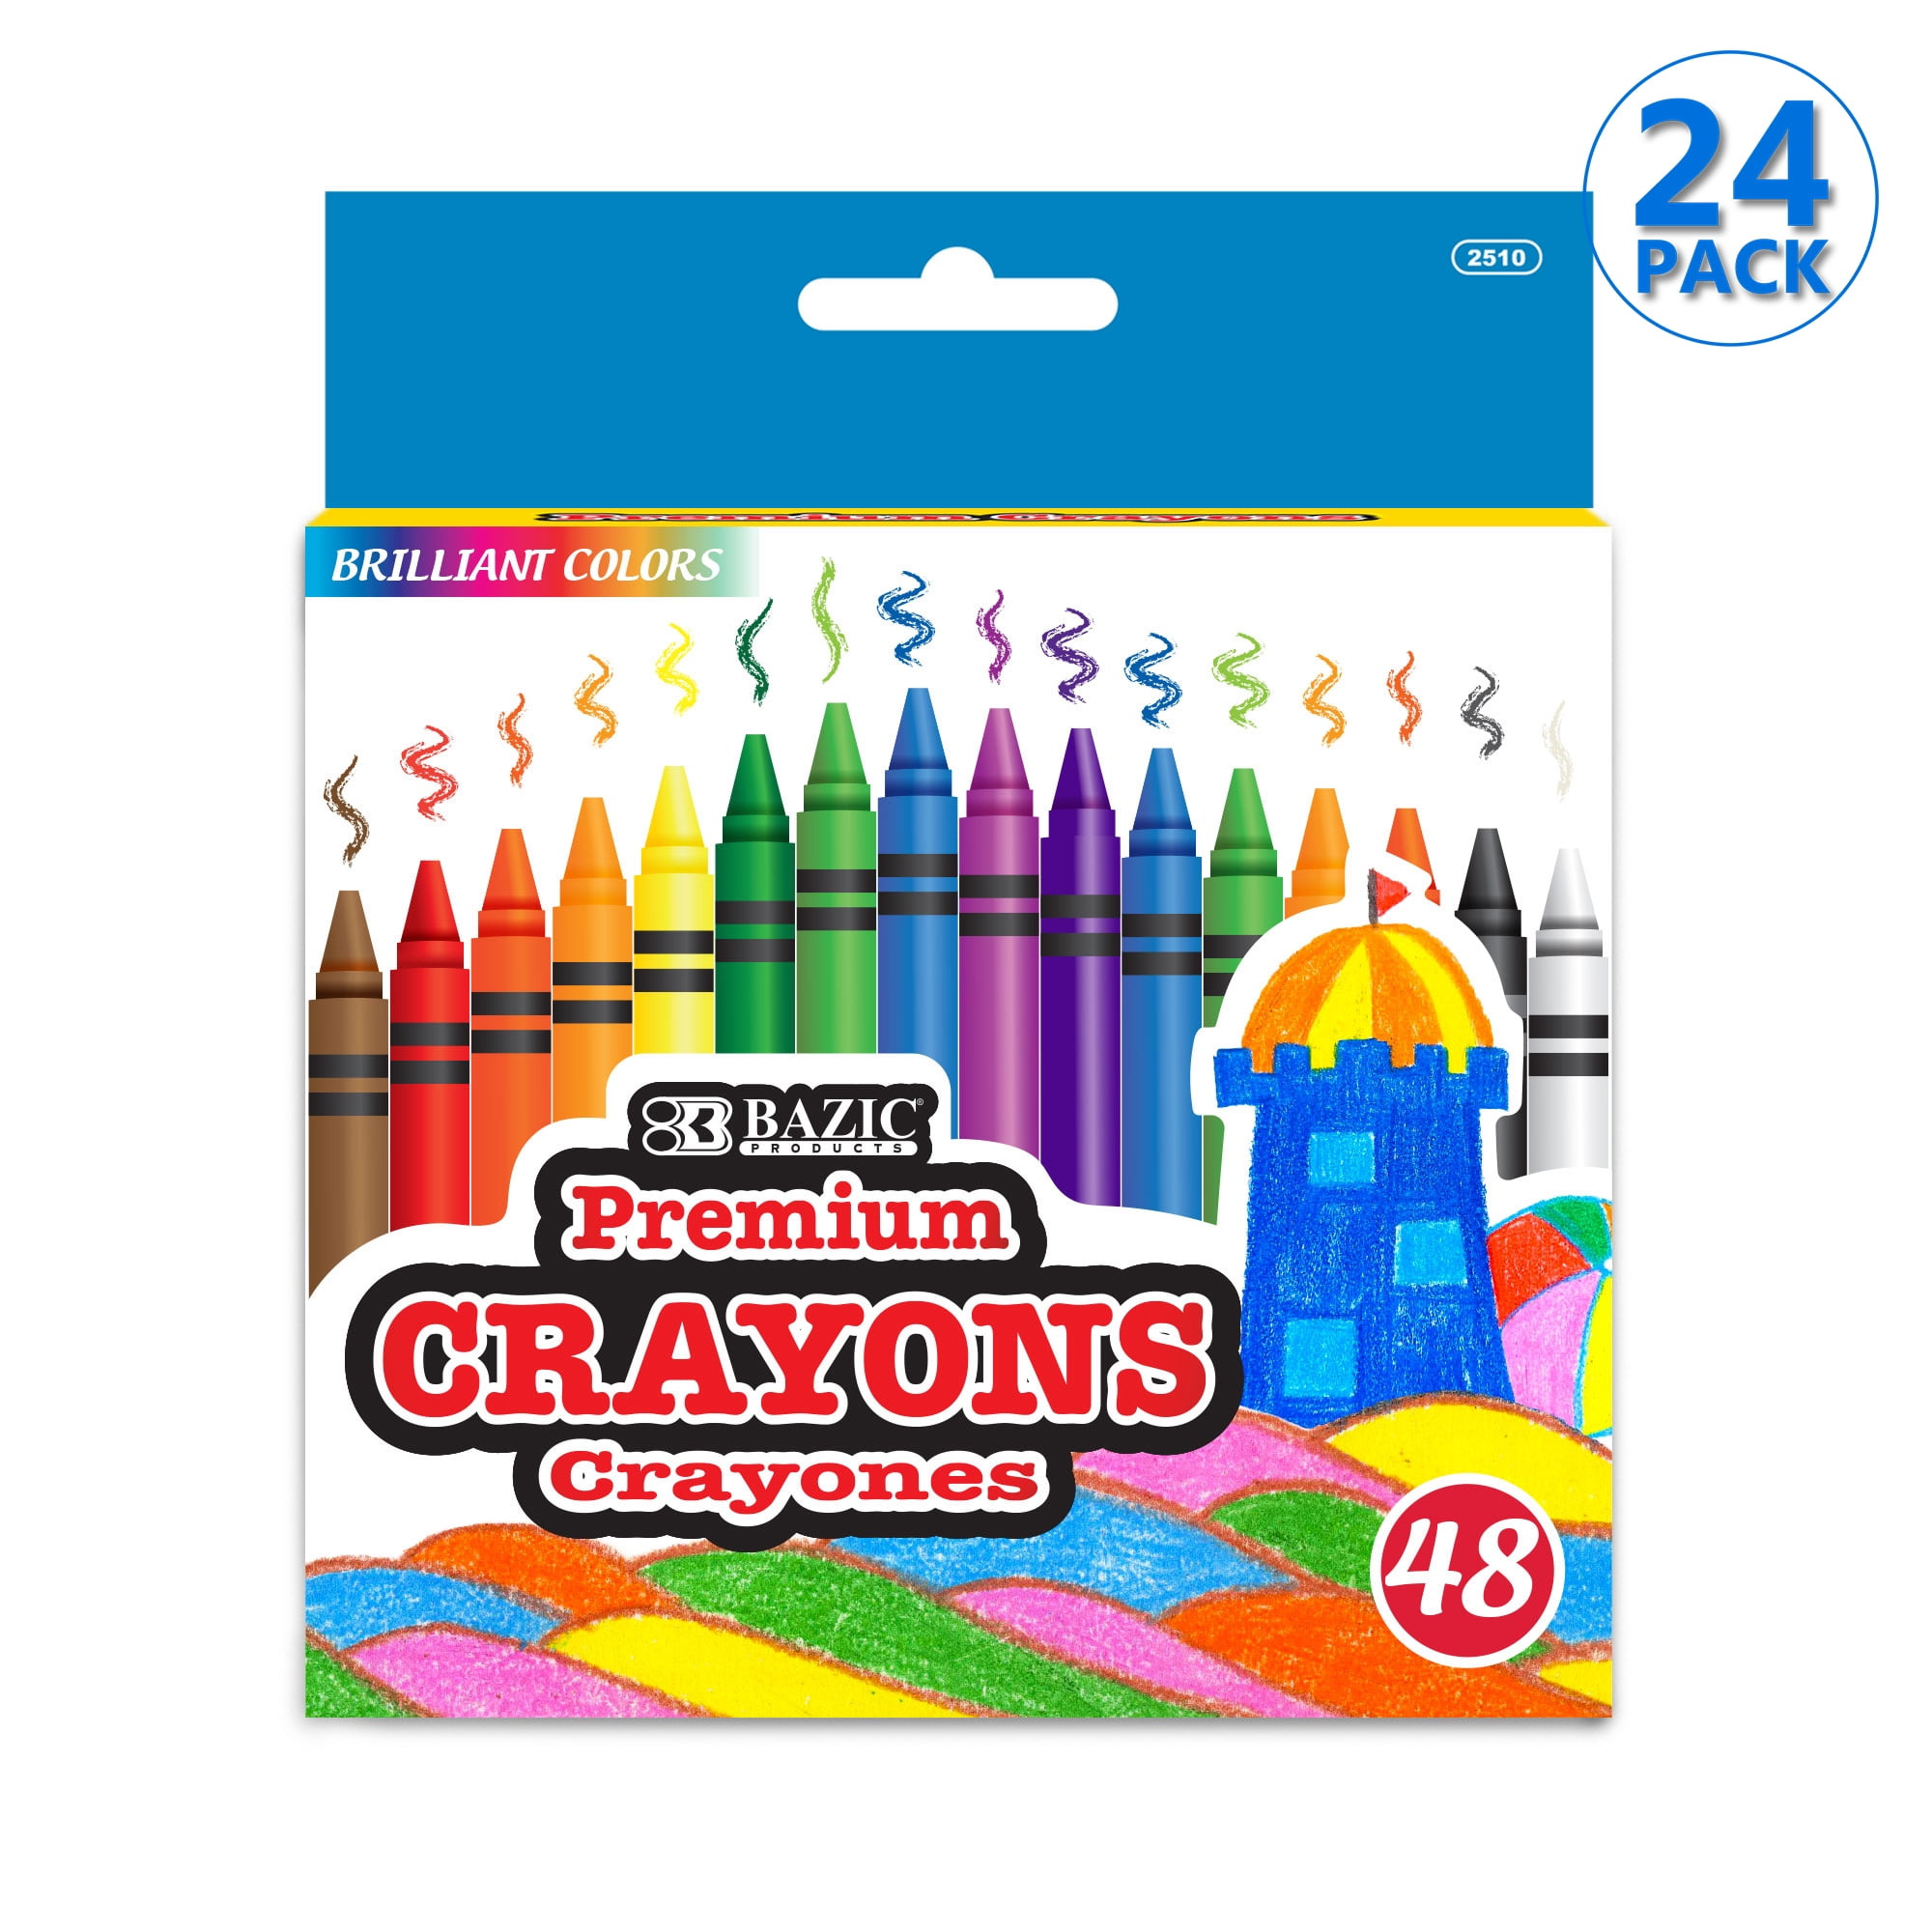  Trail maker Wholesale Bright Wax Coloring Crayons in